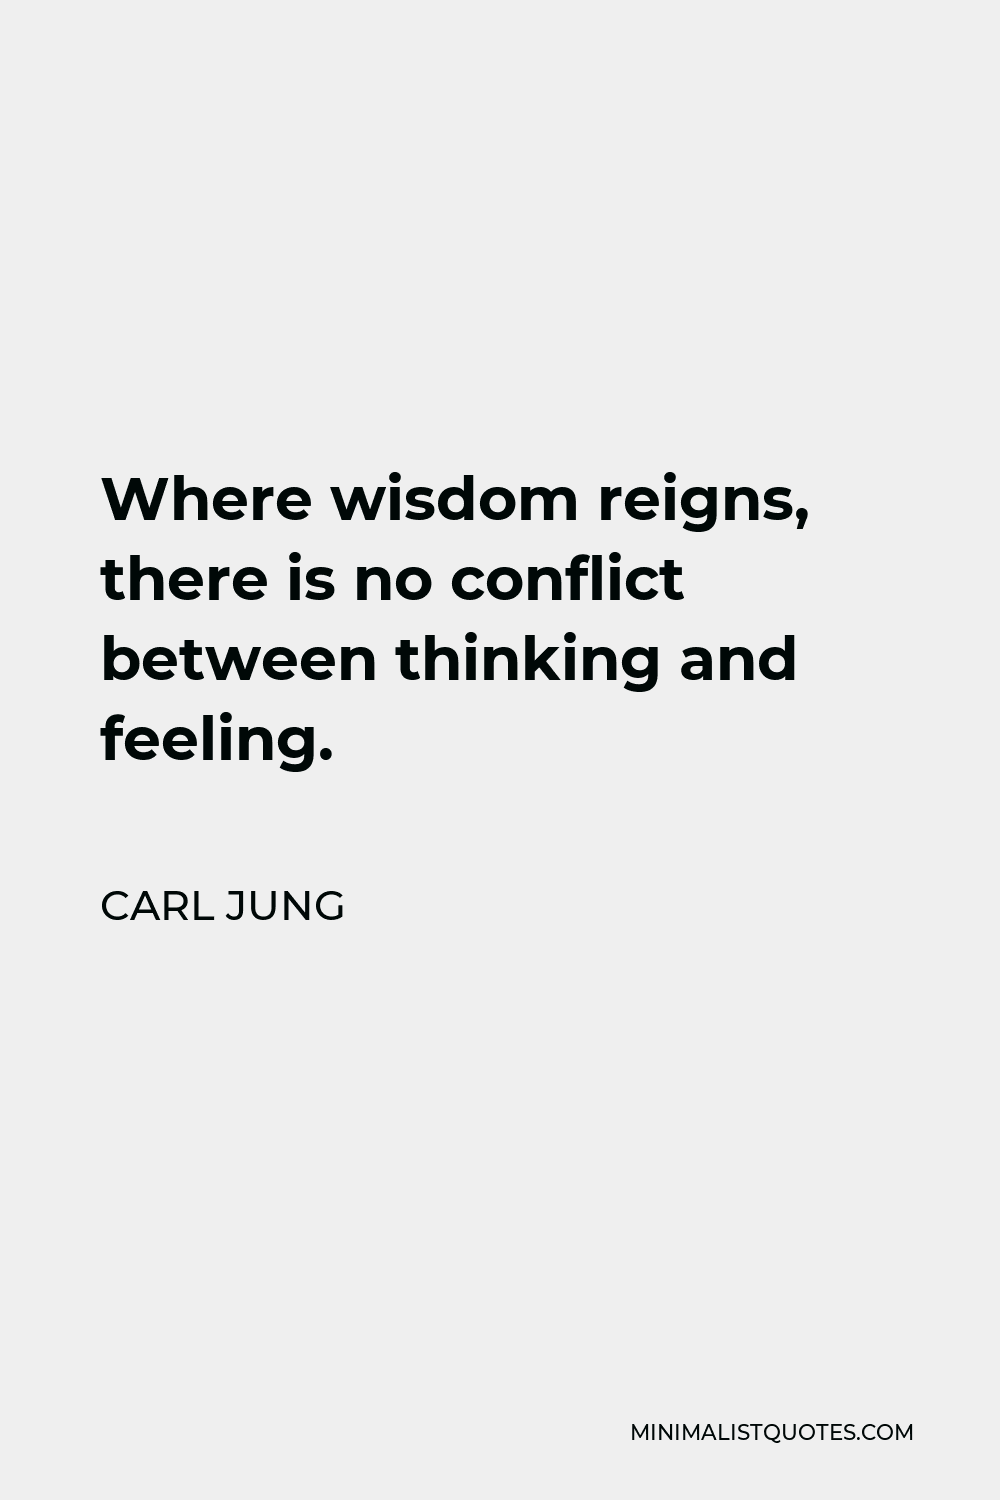 Carl Jung Quote Where Wisdom Reigns There Is No Conflict Between Thinking And Feeling